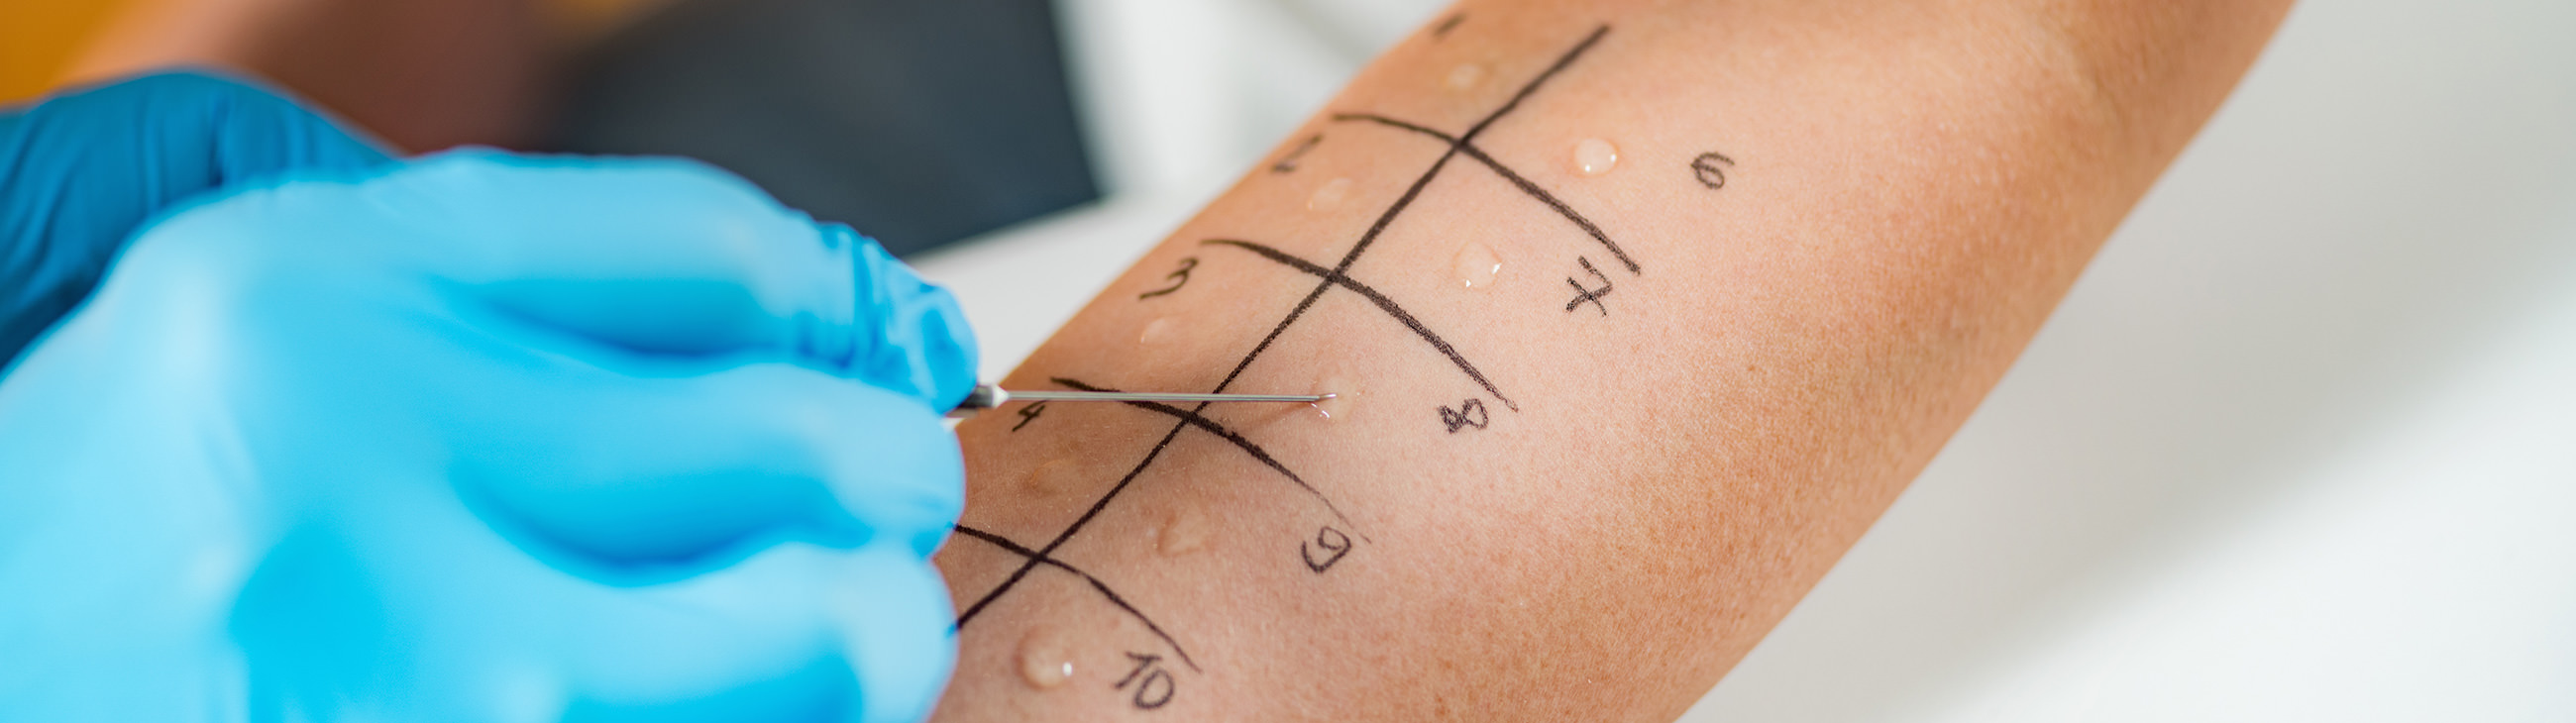 Identifying the cause of eczema through allergy tests